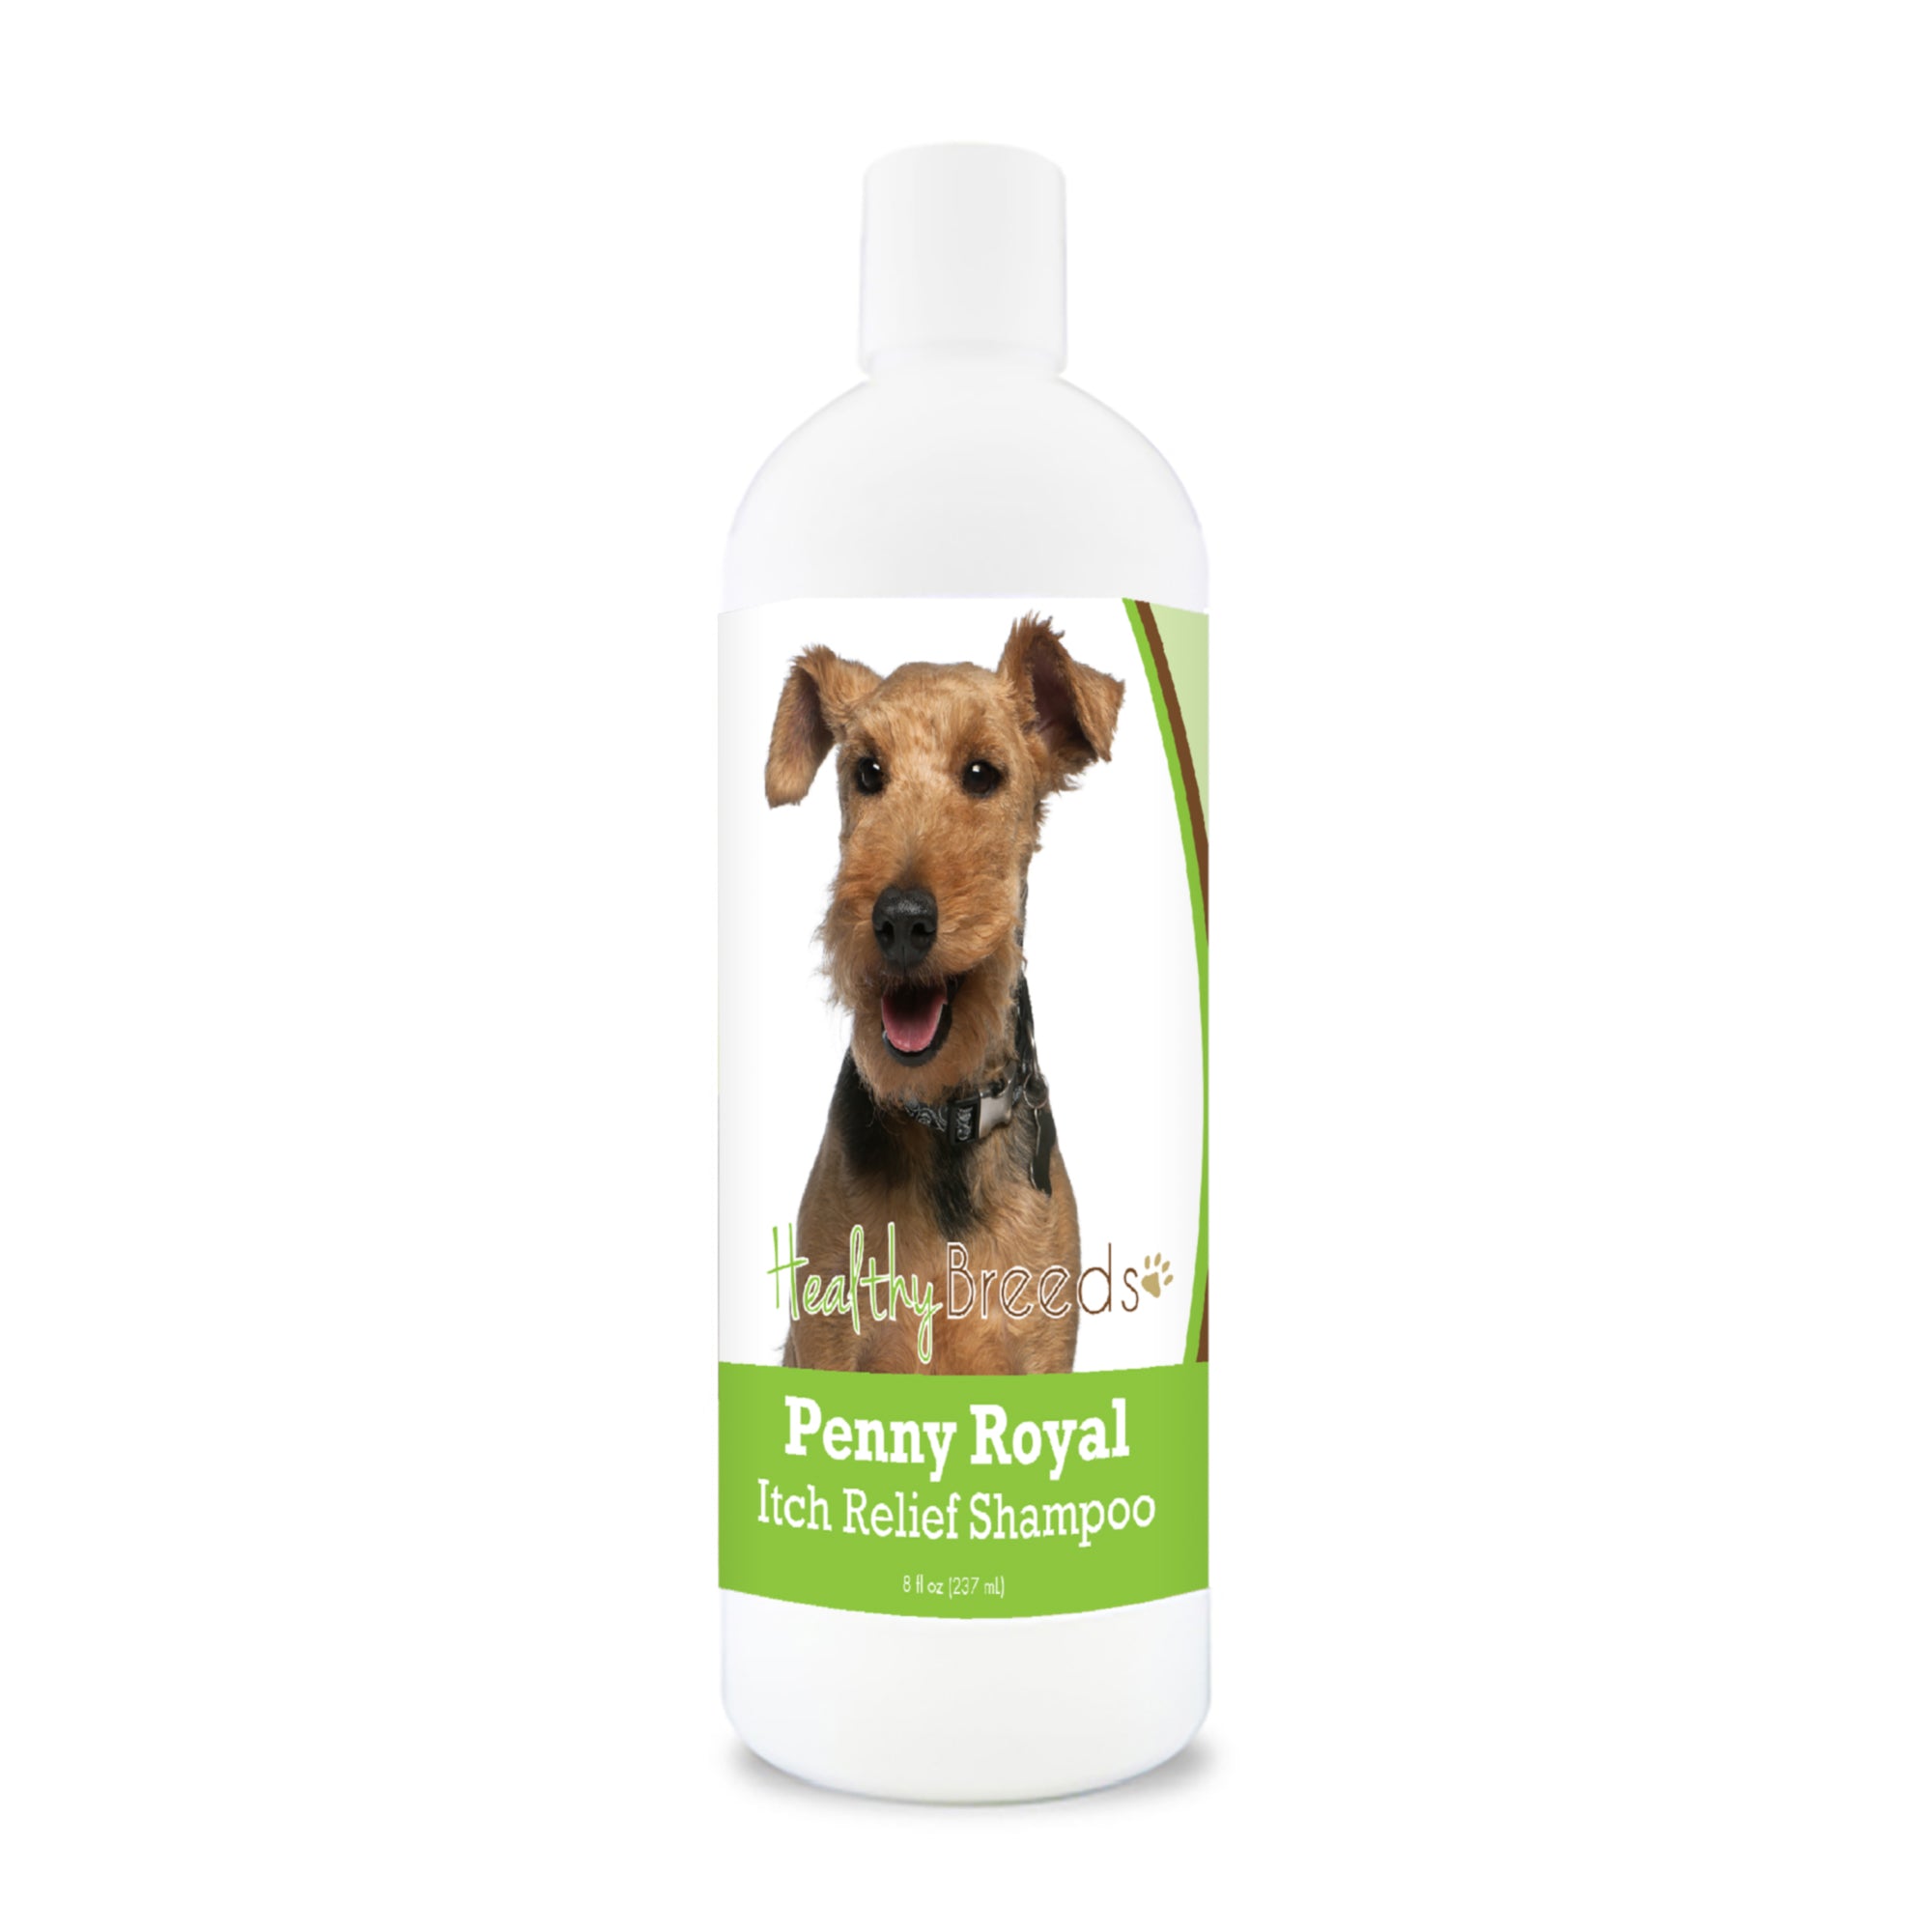 Welsh Terrier Penny Royal Itch Relief Shampoo 8 oz